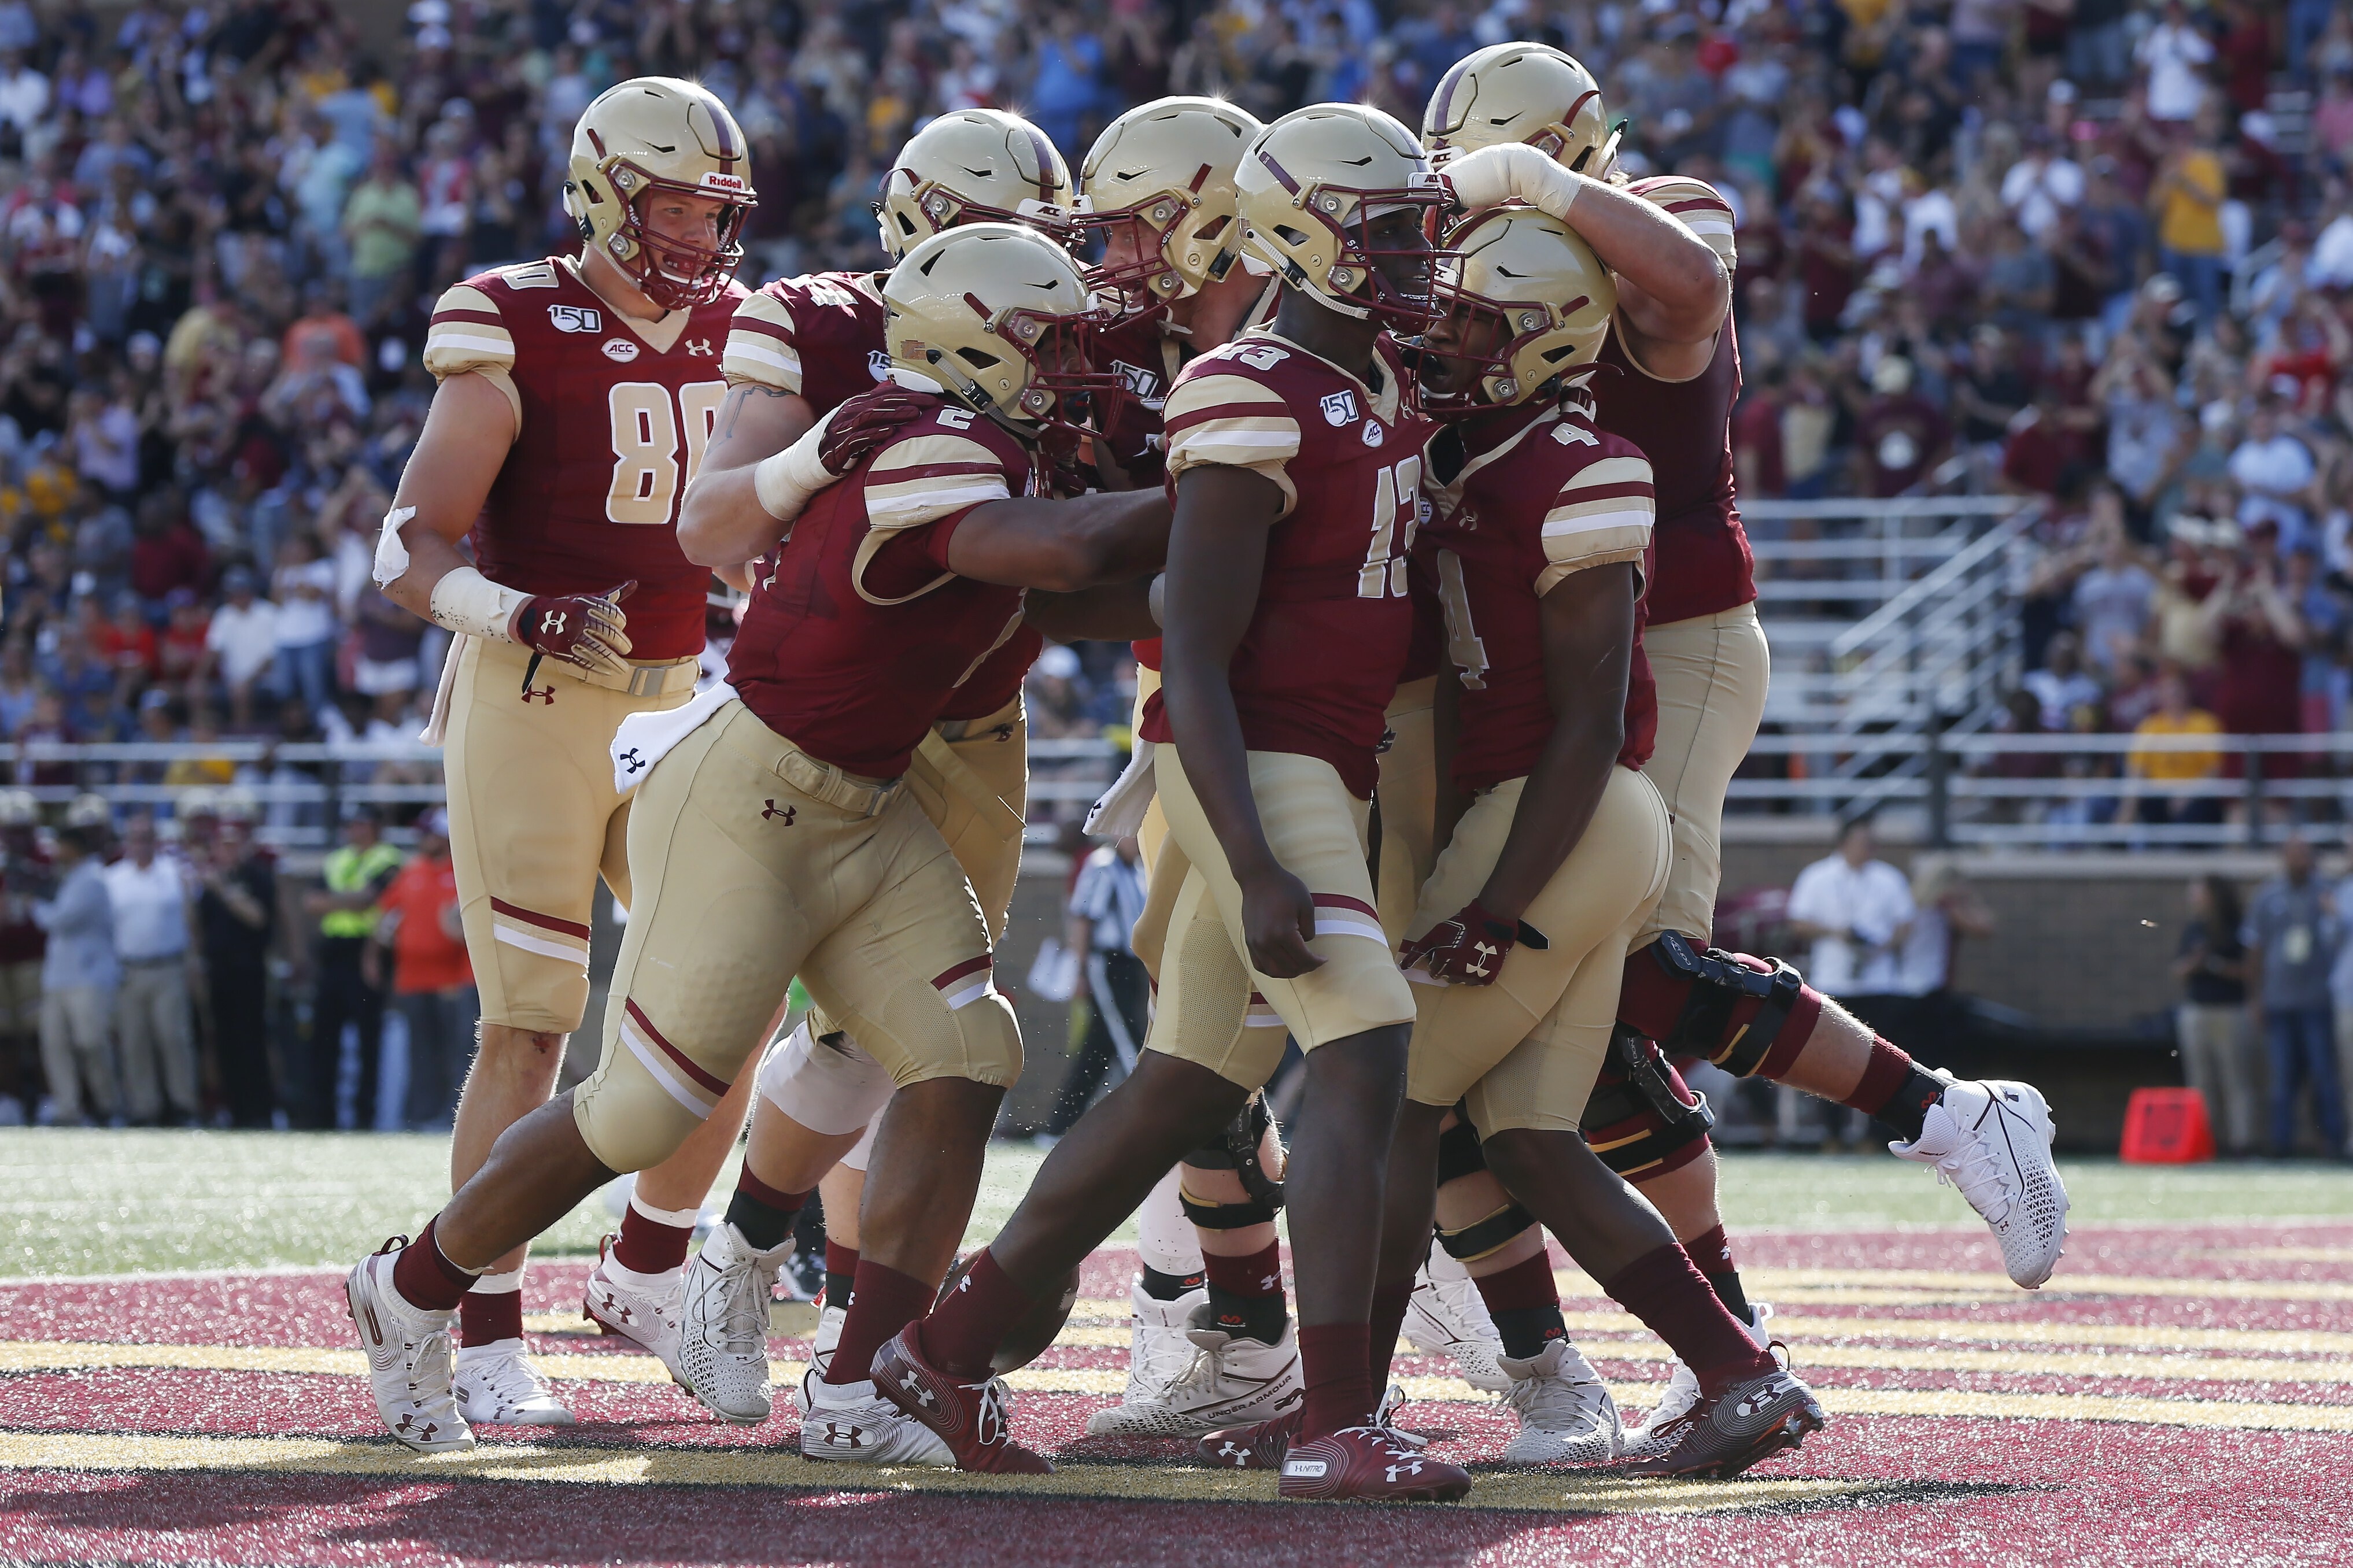 Brown's 2 TD passes and 1 run leads BC past Va. Tech 35-28